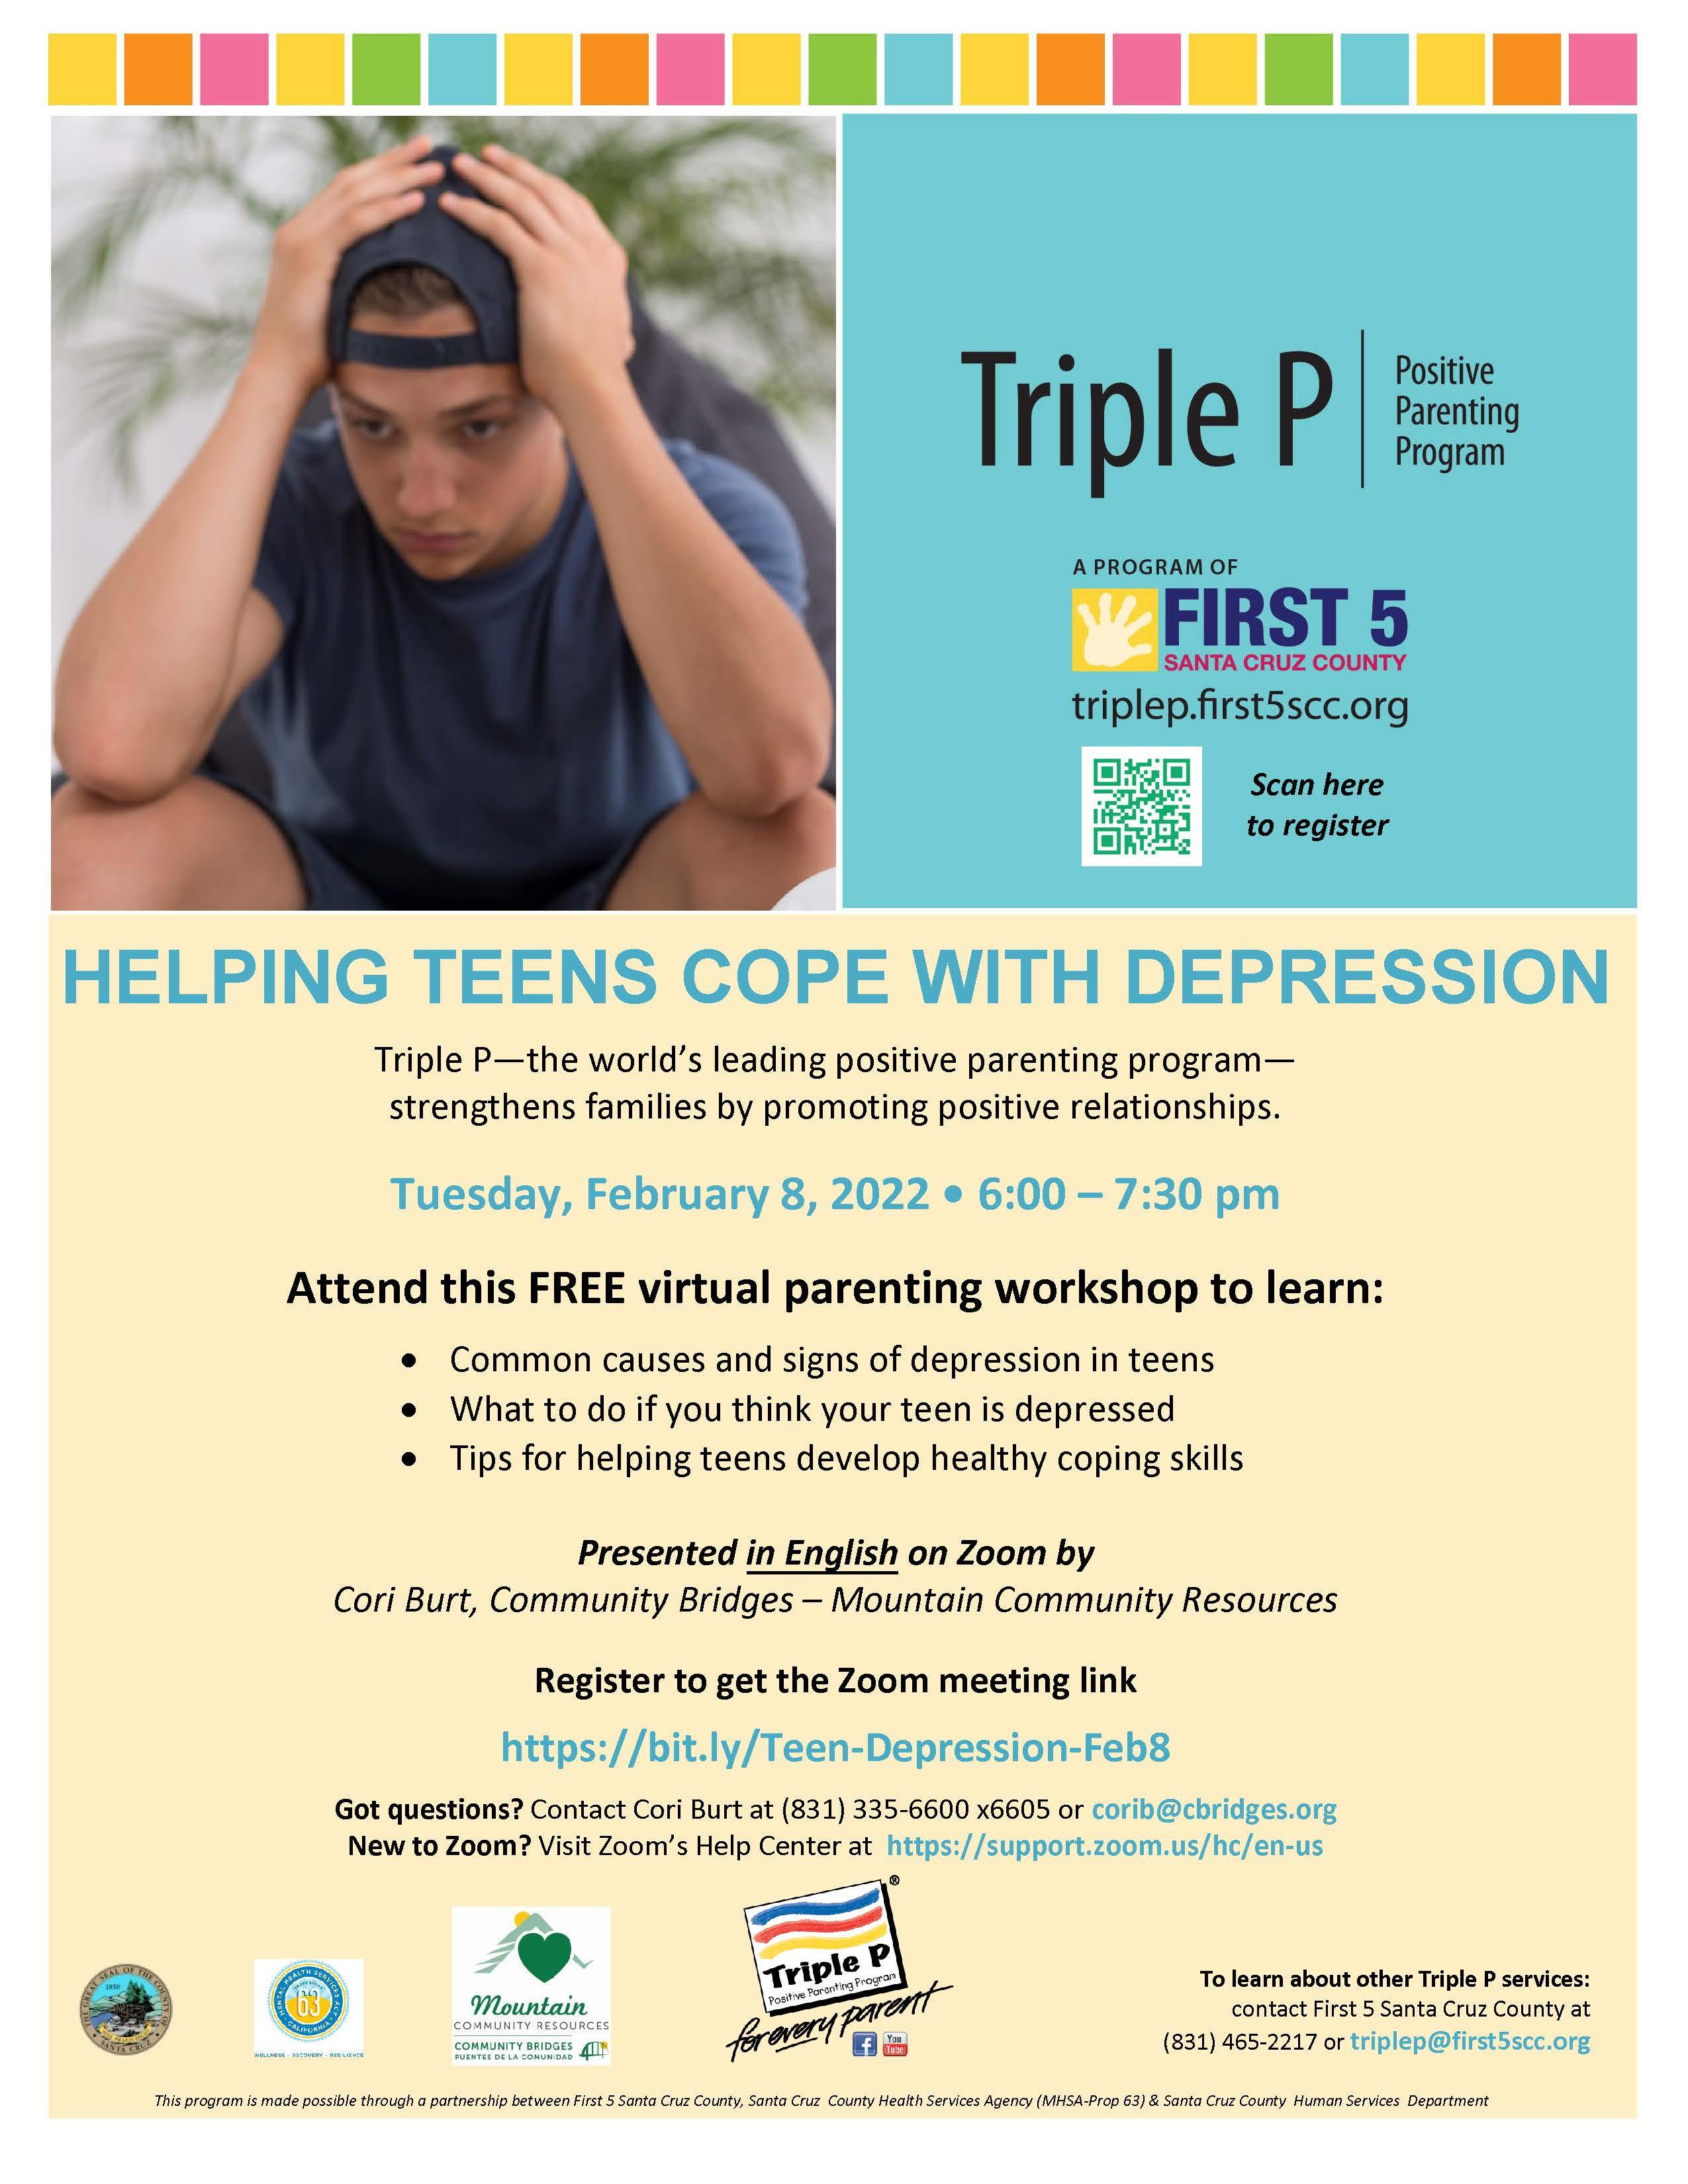 helping teens cope with depression workshop; call 831-335-6600 x6605 for details